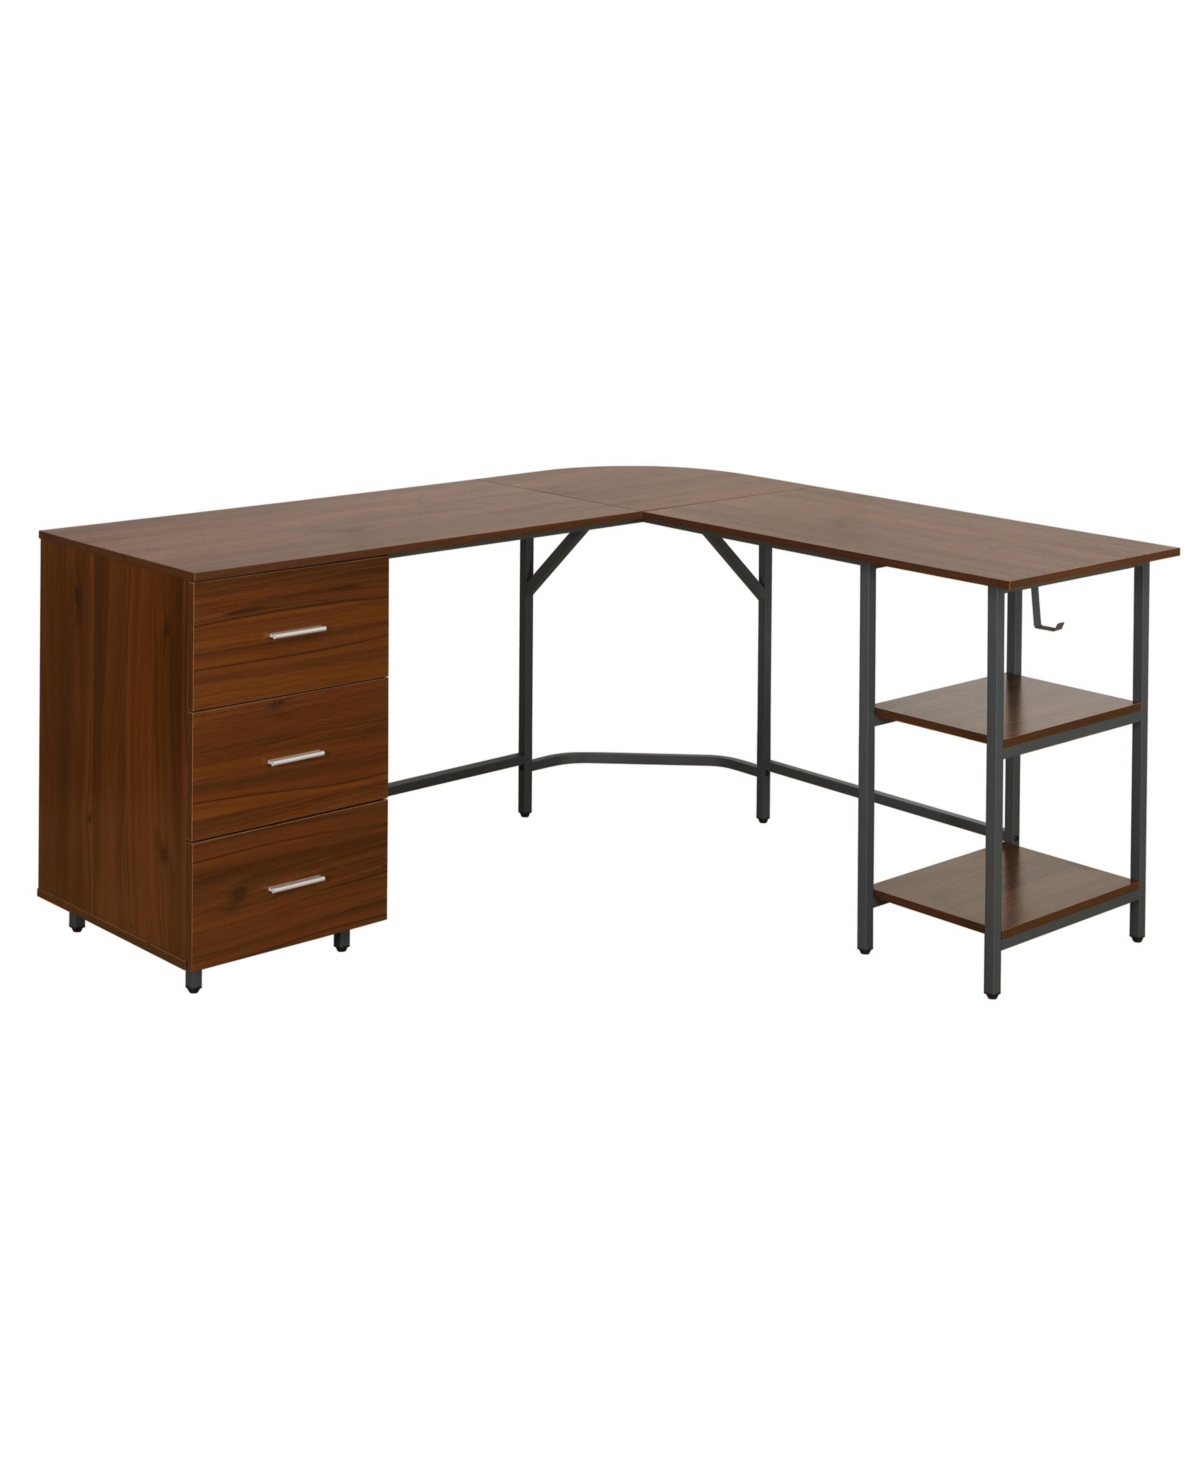 Techni Mobili Wood L-shape Home Office With Storage Two-tone Desk In Walnut